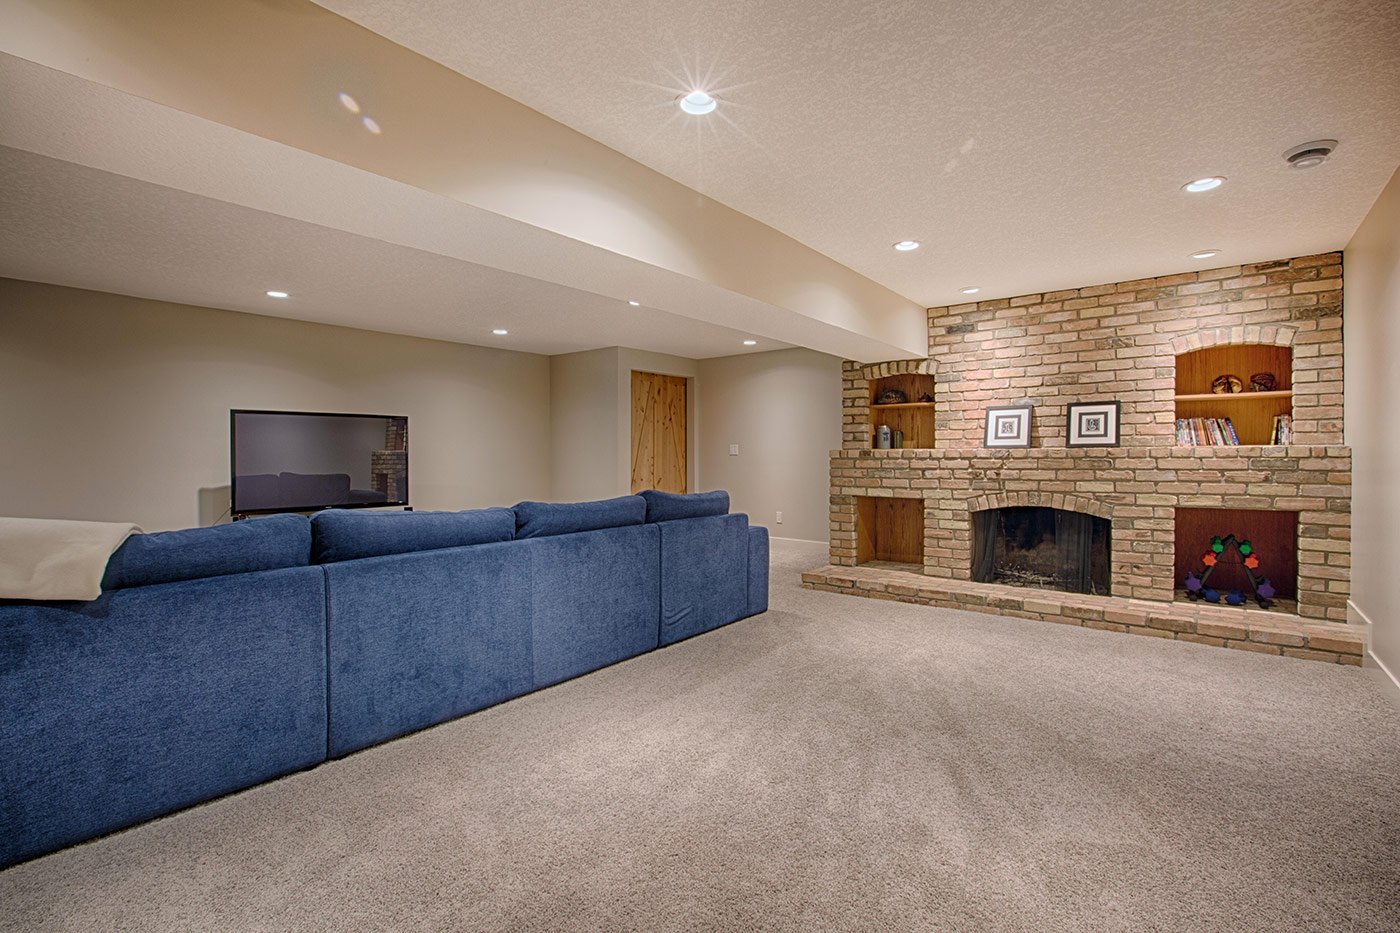  How to Get the Most from Your Basement Renovations in Calgary